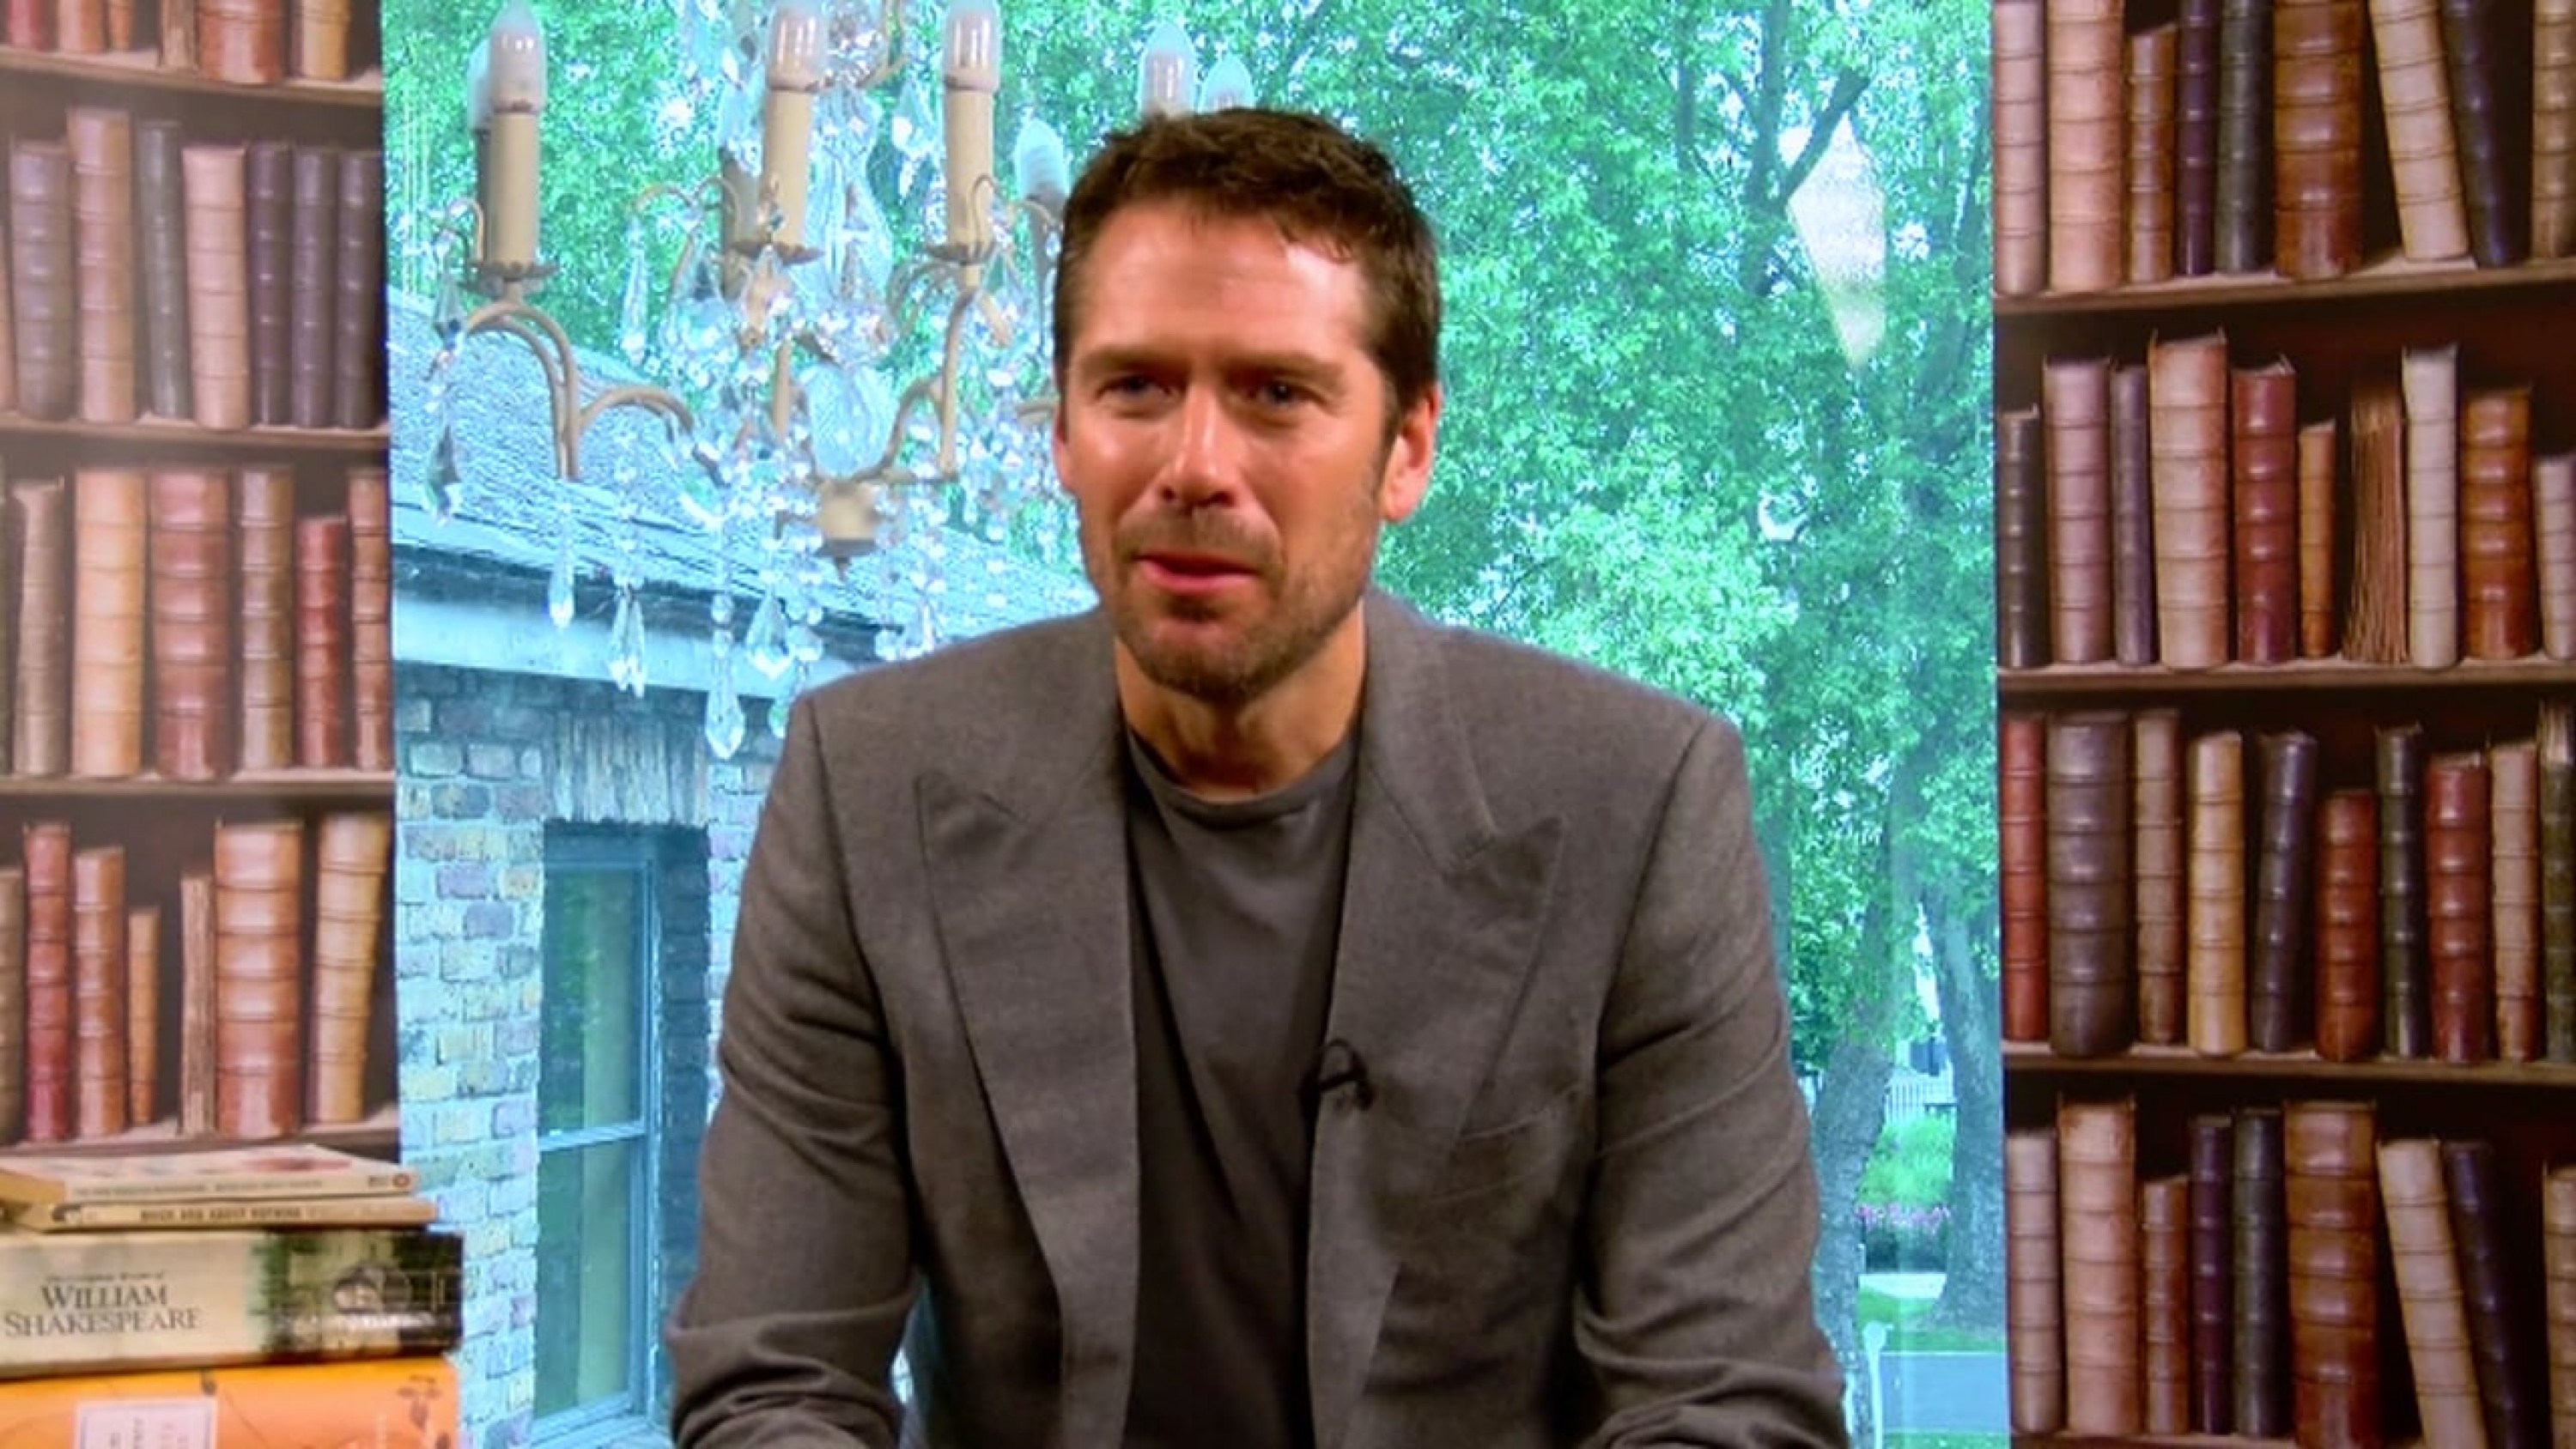 Actor Alexis Denisof who plays Benedict in director Joss Whedon's modern-dr